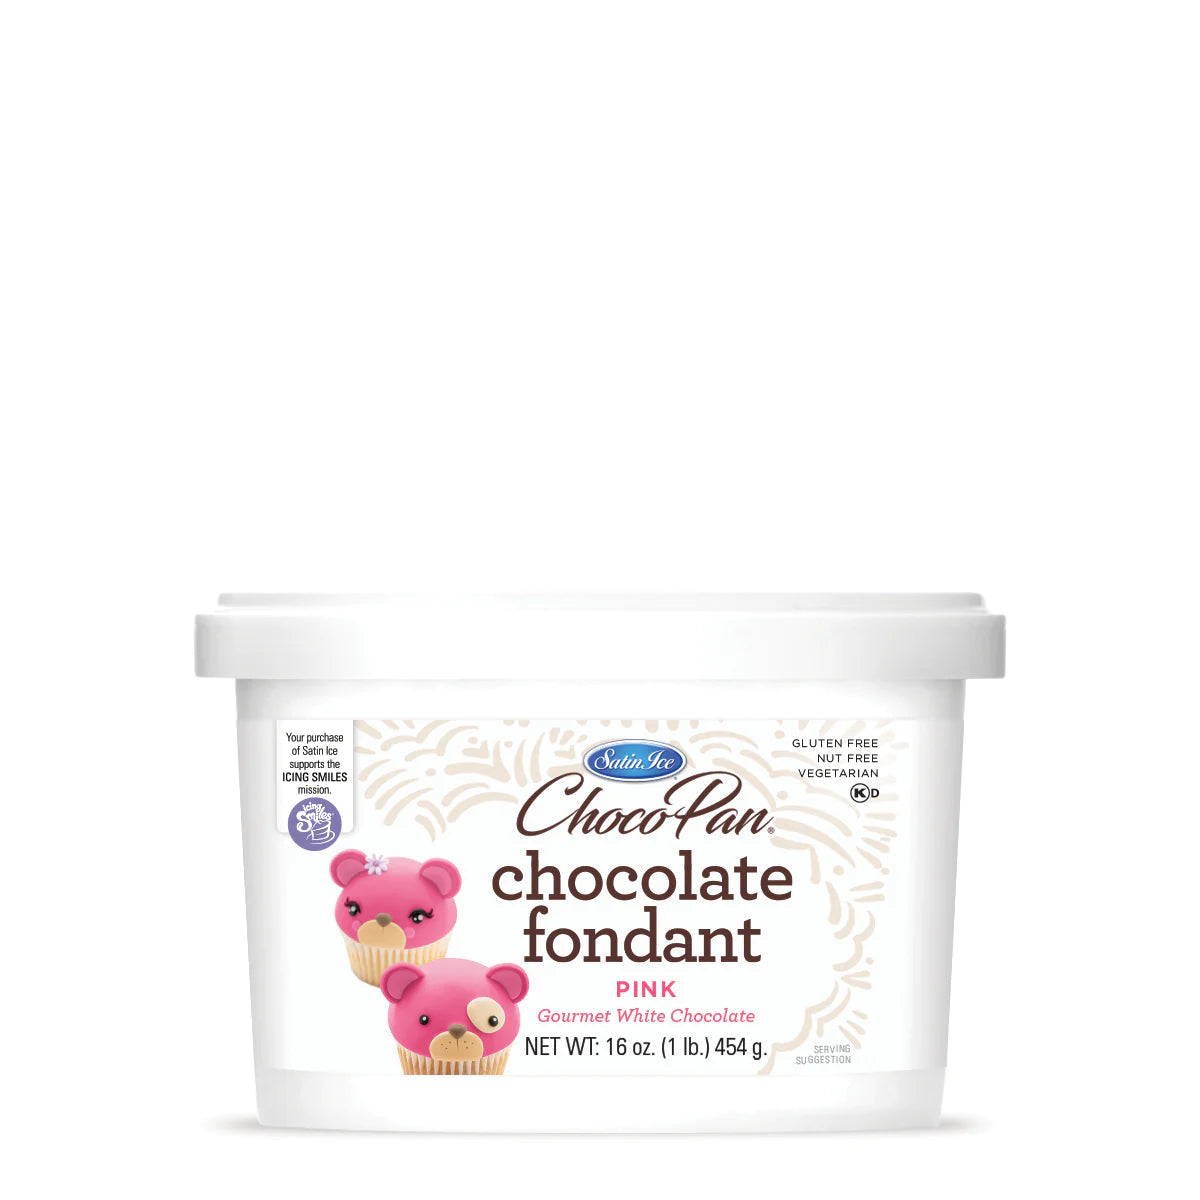 Pink Colored and White Chocolate Flavored Fondant in a 1 Pound Container